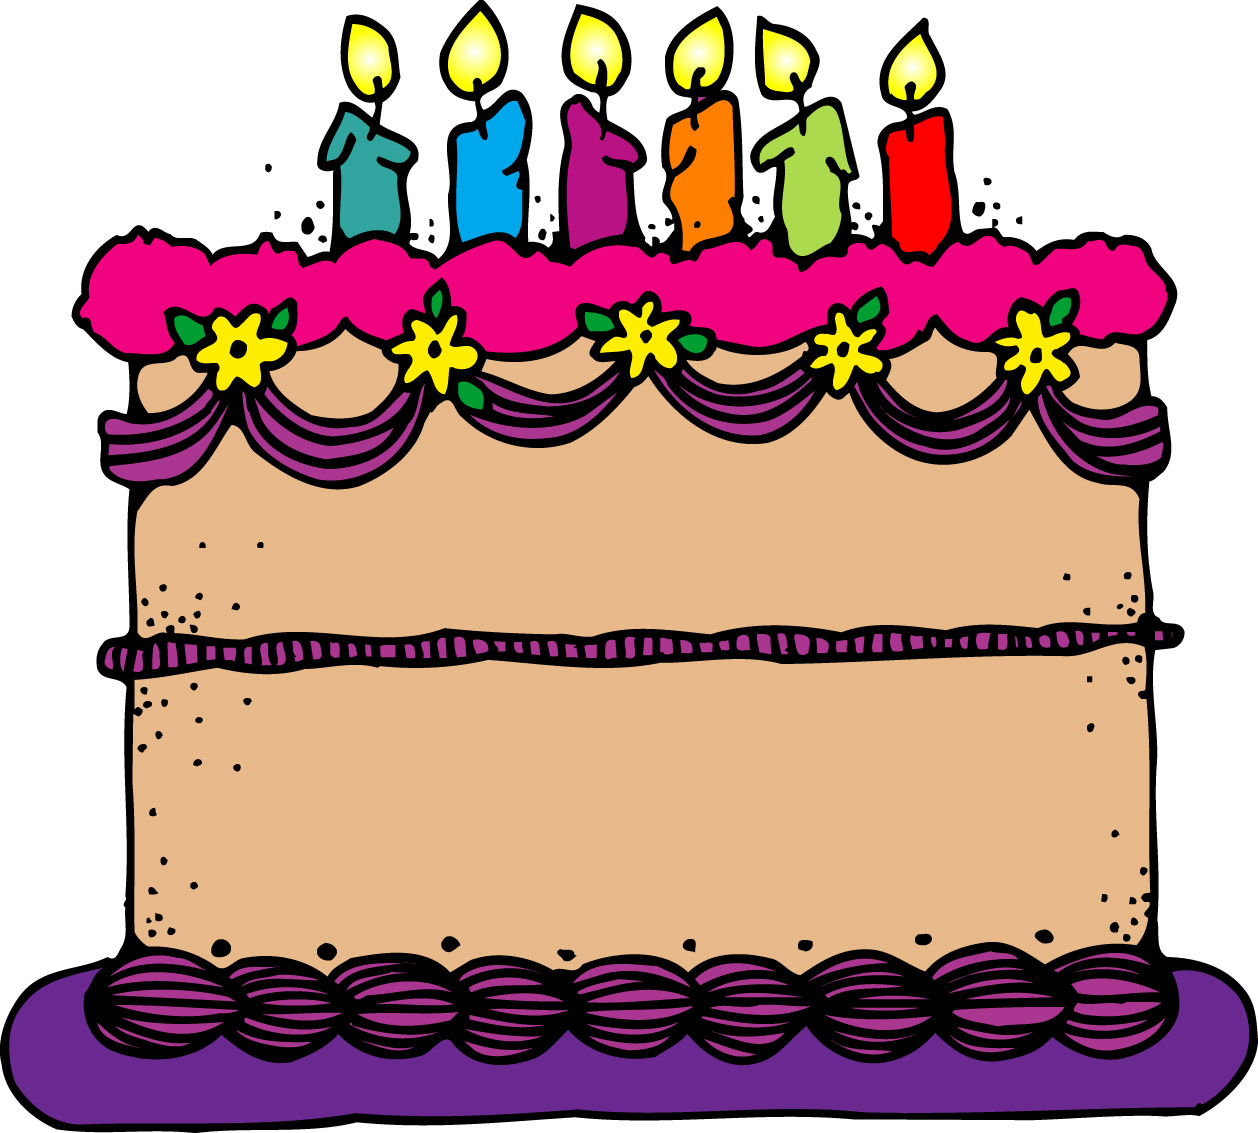 Free Birthday Cake Images Free Download Clip Art Free Clip Art 